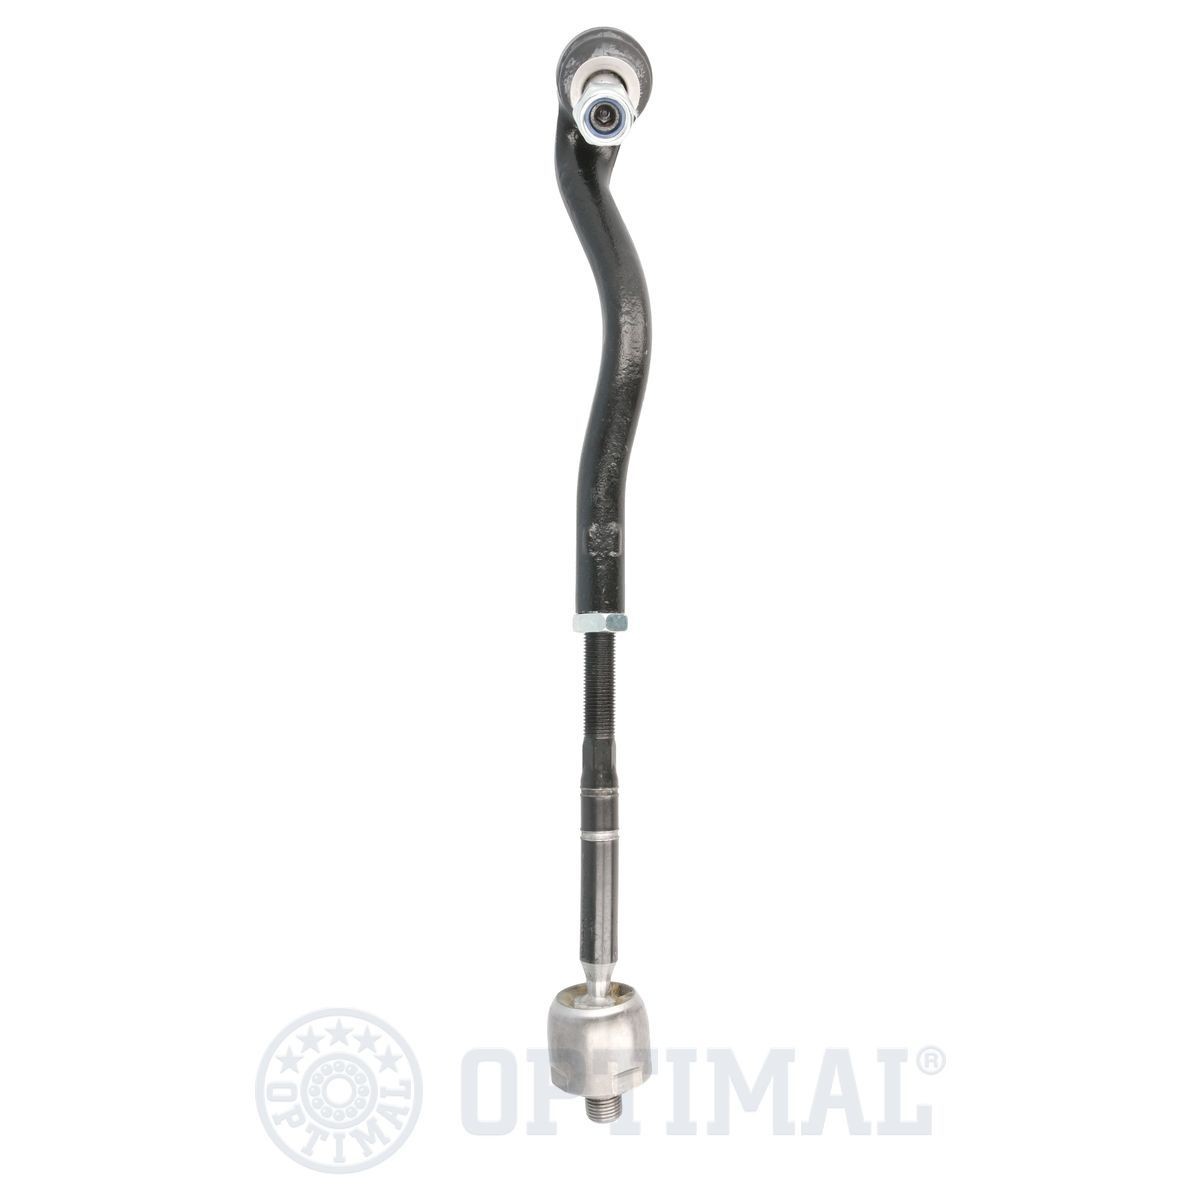 OPTIMAL Steering bar G0-794 suitable for MERCEDES-BENZ ML-Class, GL